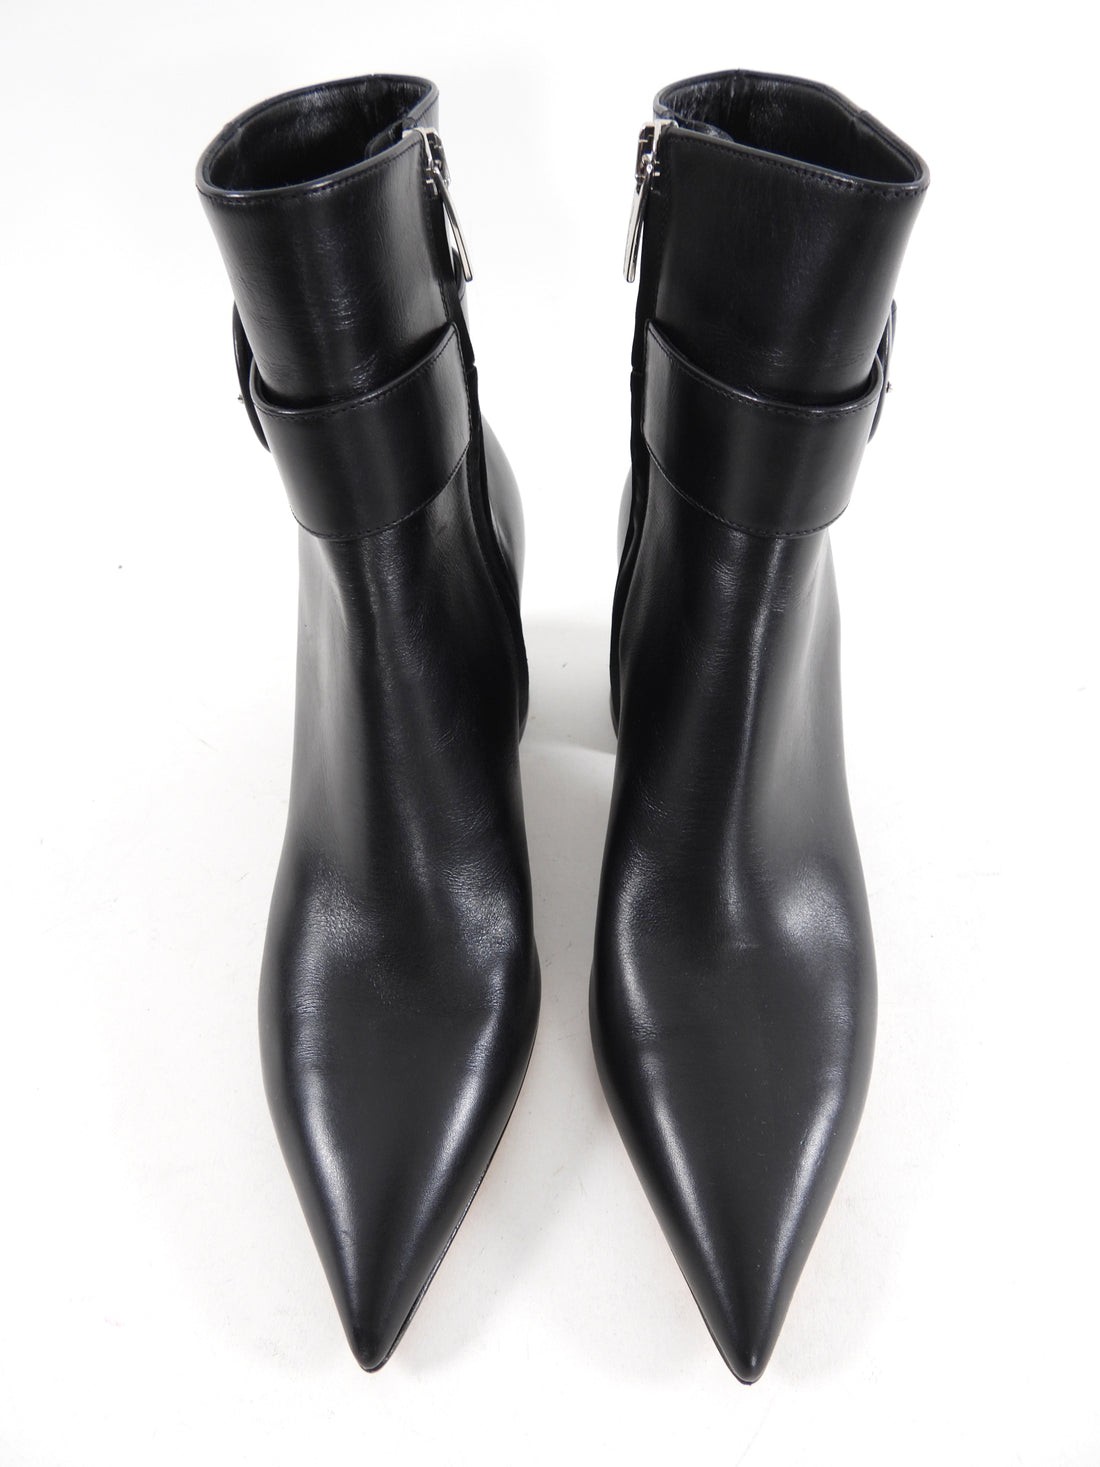 Gianvito Rossi Black Leather Buckled Ankle Boot - 36